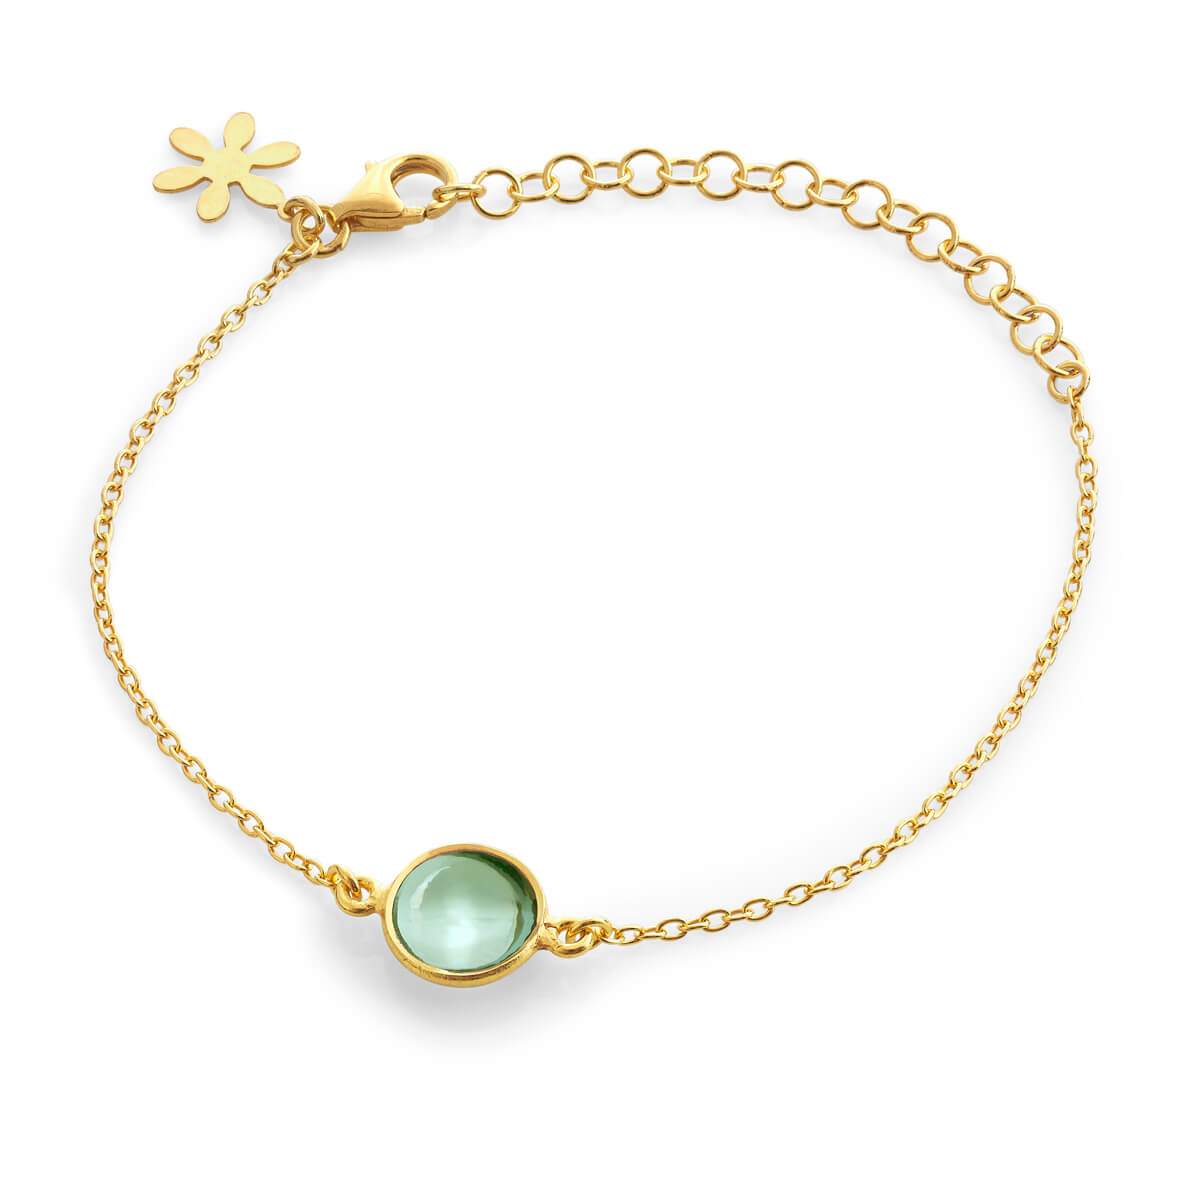 Bracelet in gold plated silver with green quartz - Susanne Friis ...